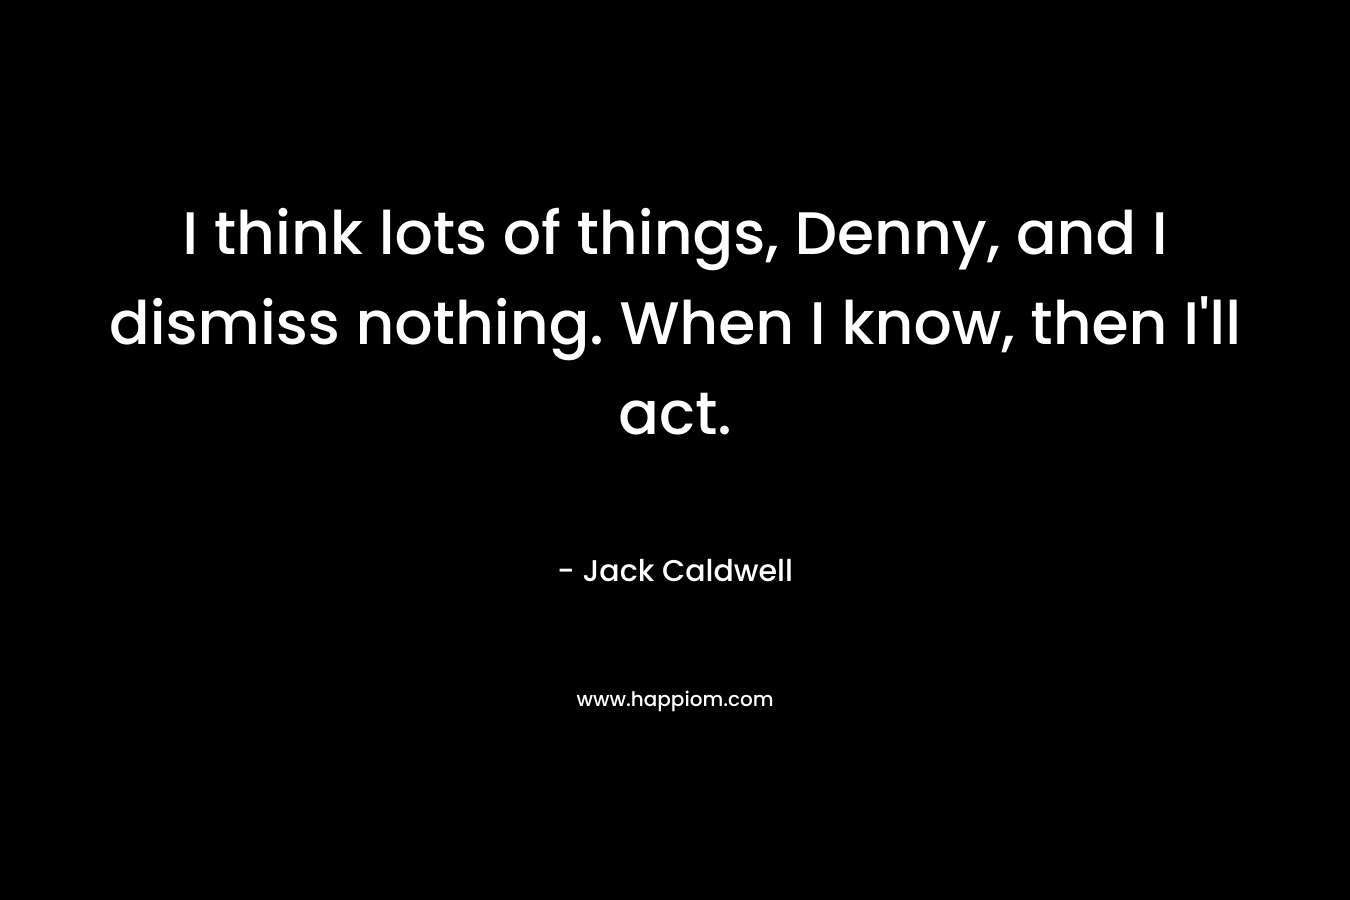 I think lots of things, Denny, and I dismiss nothing. When I know, then I’ll act. – Jack Caldwell